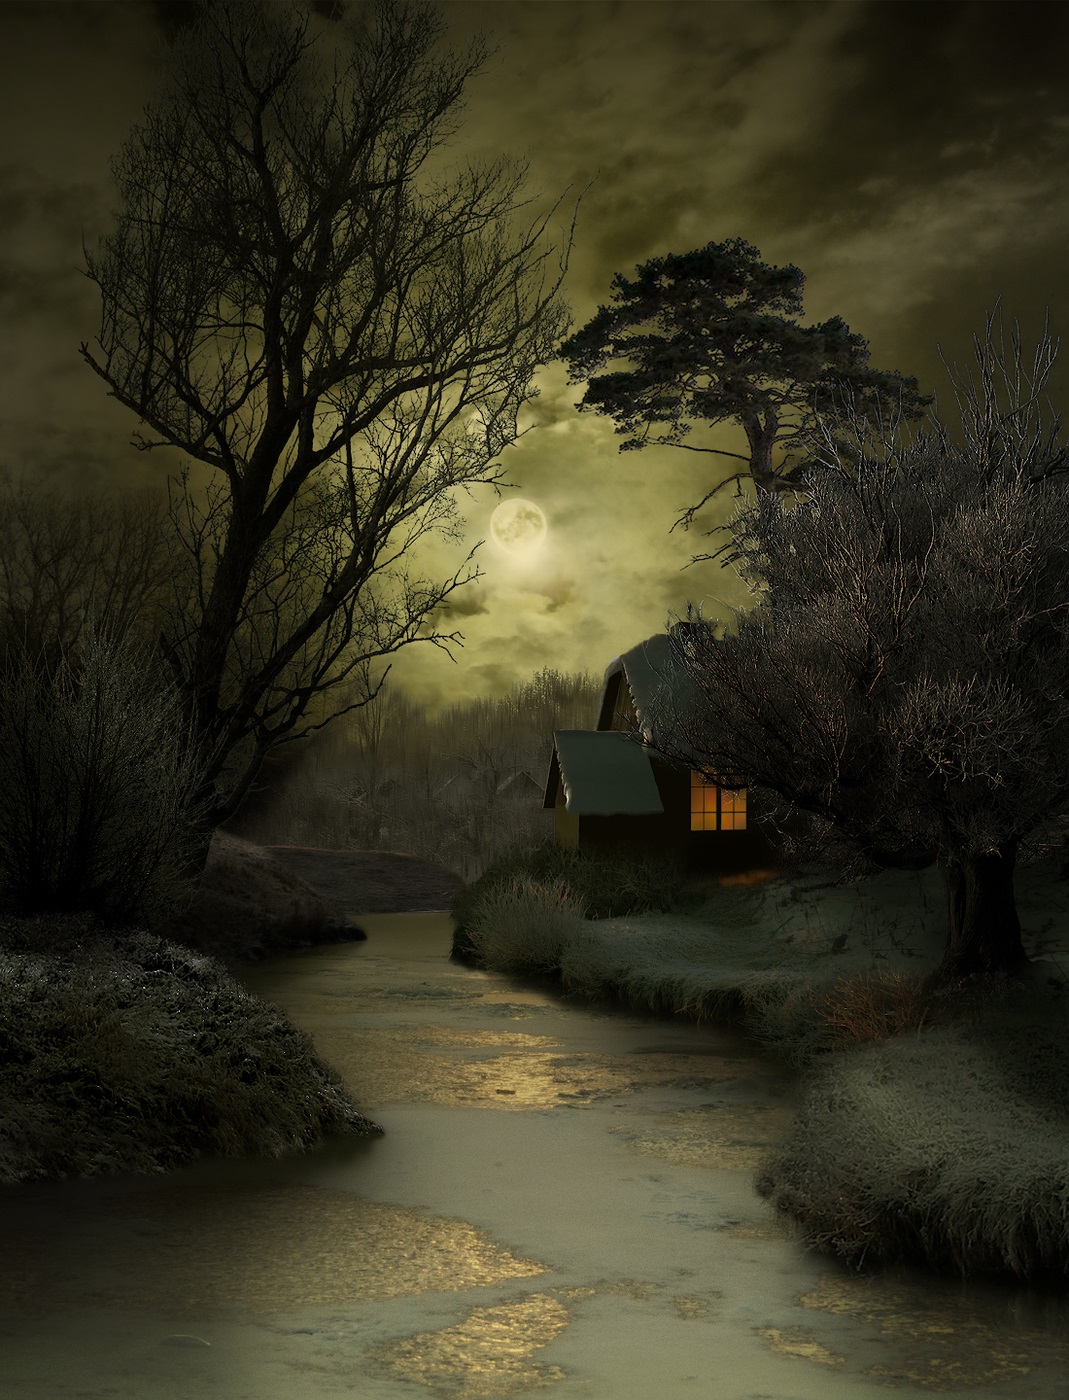 Moonlit night in winter on the banks of the river